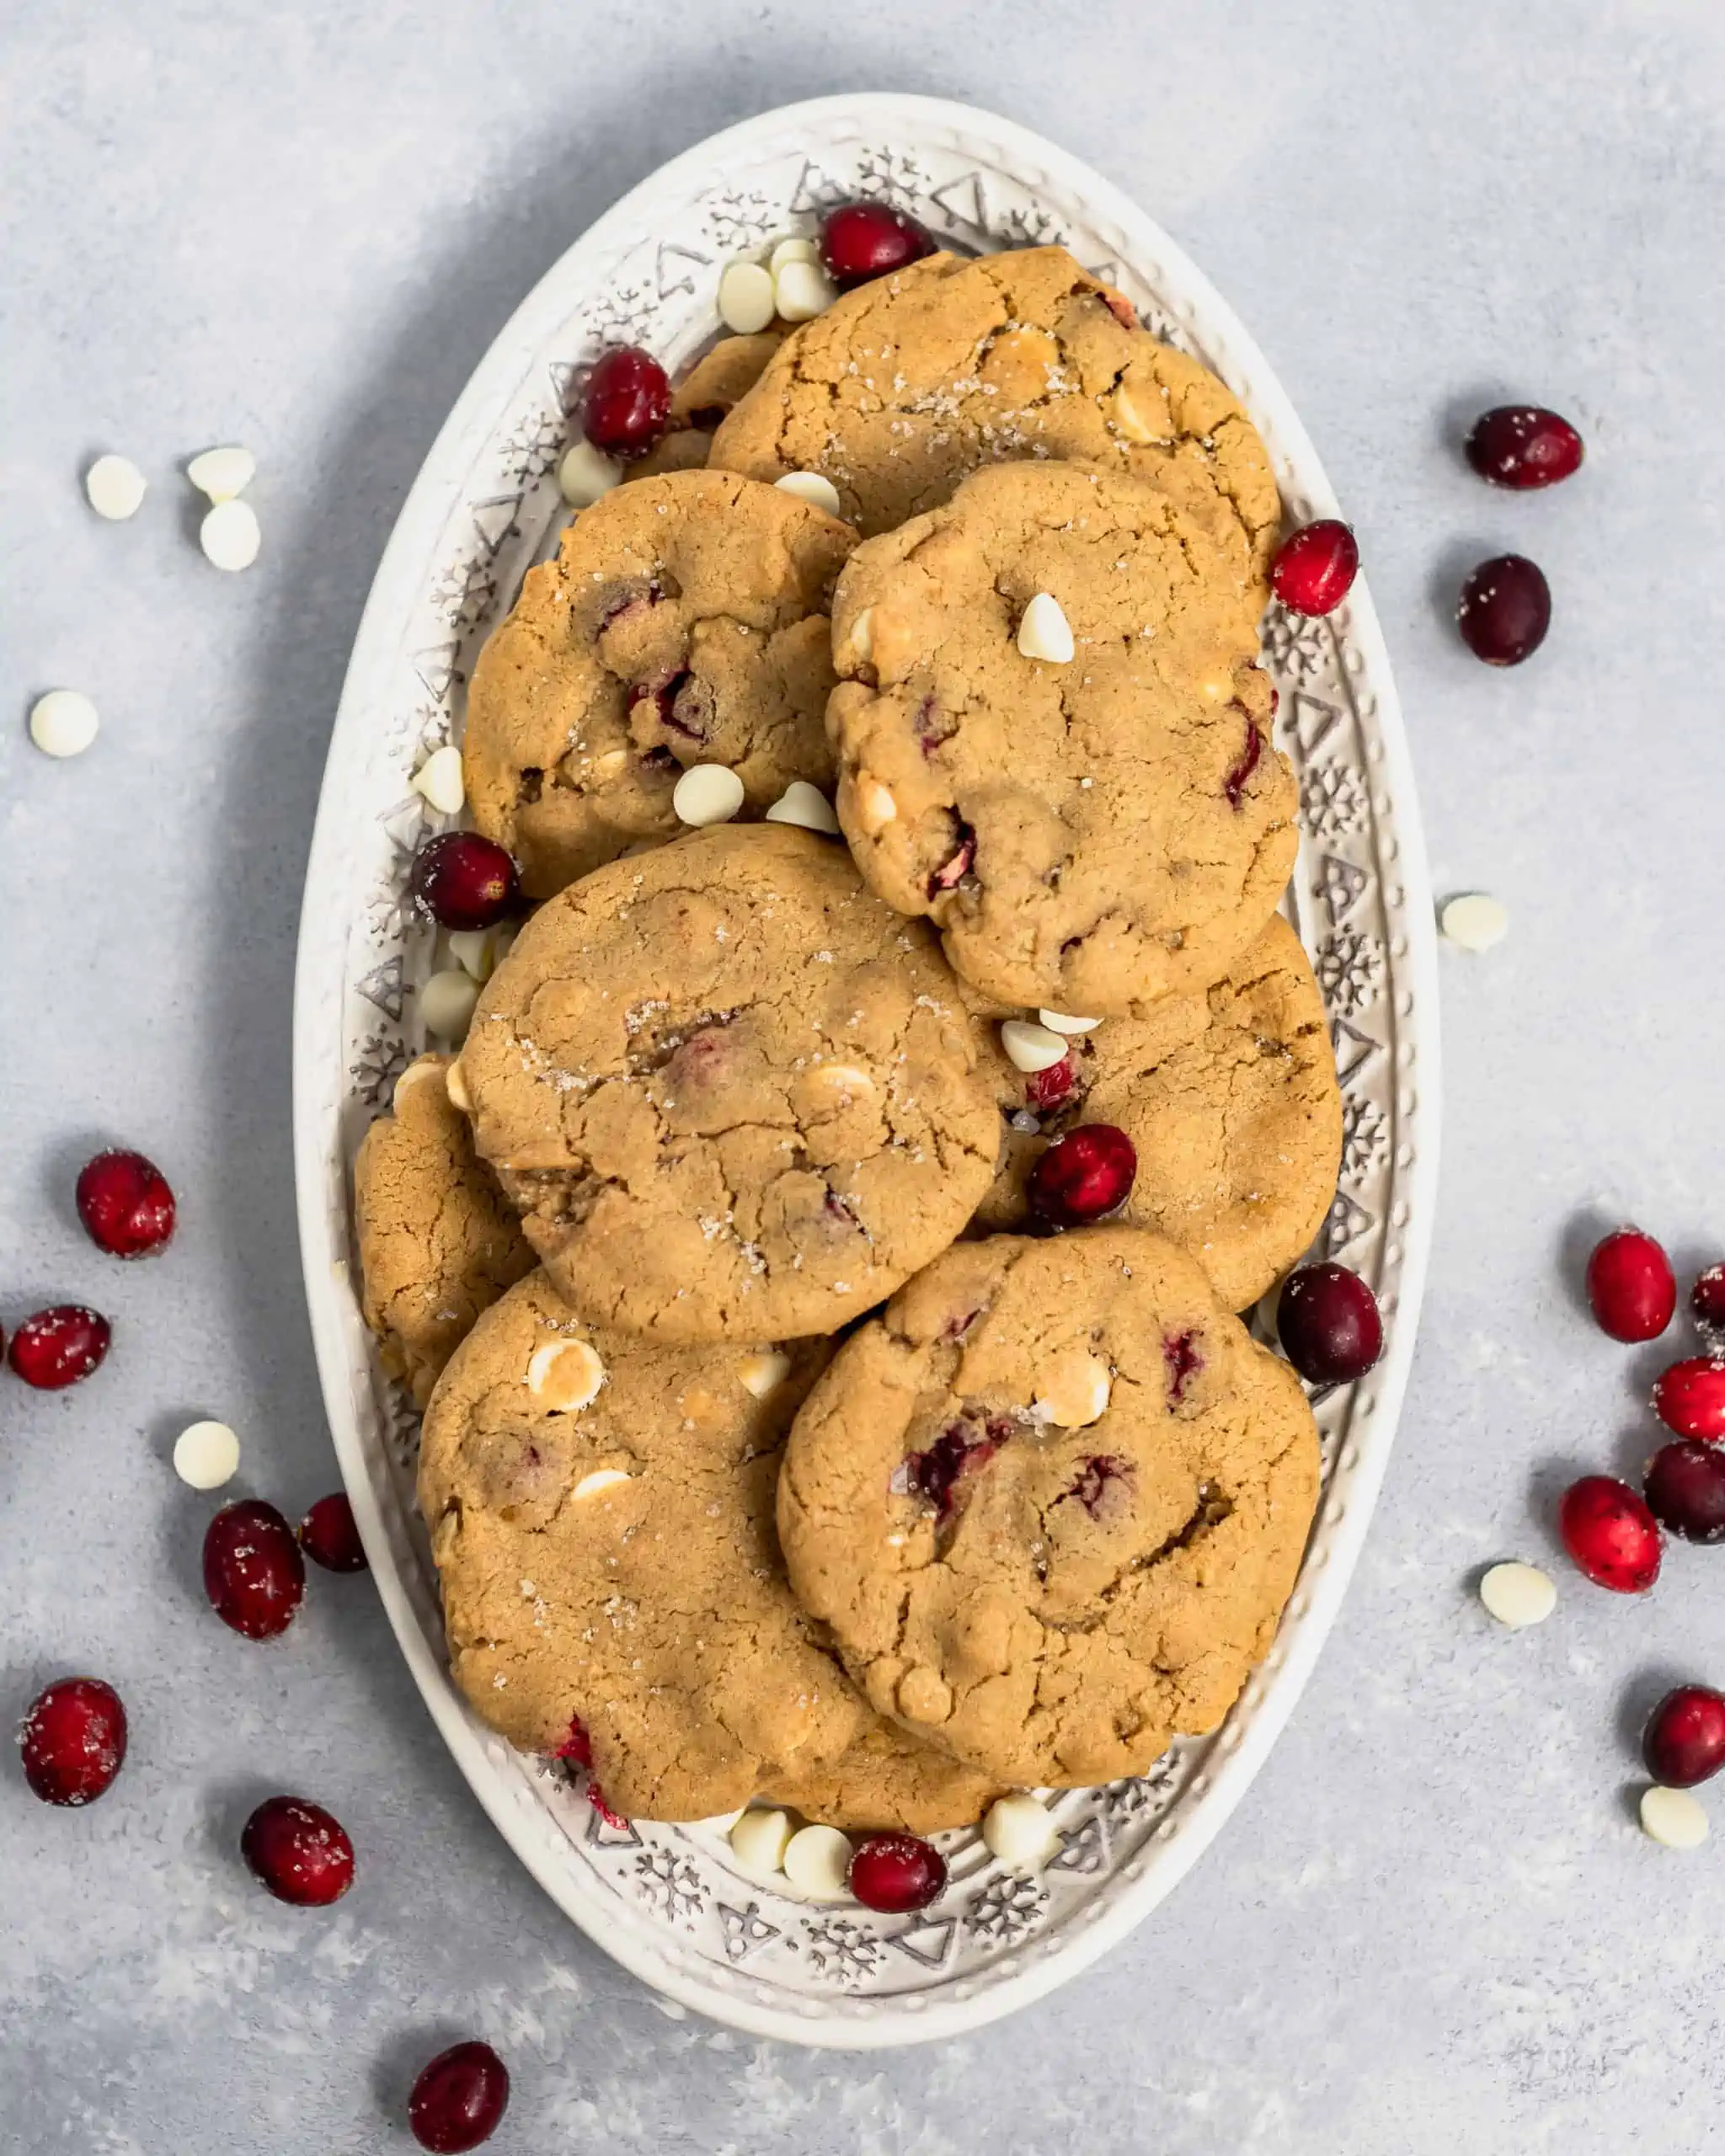 white chocolate cranberry walnut cookies on a plate.